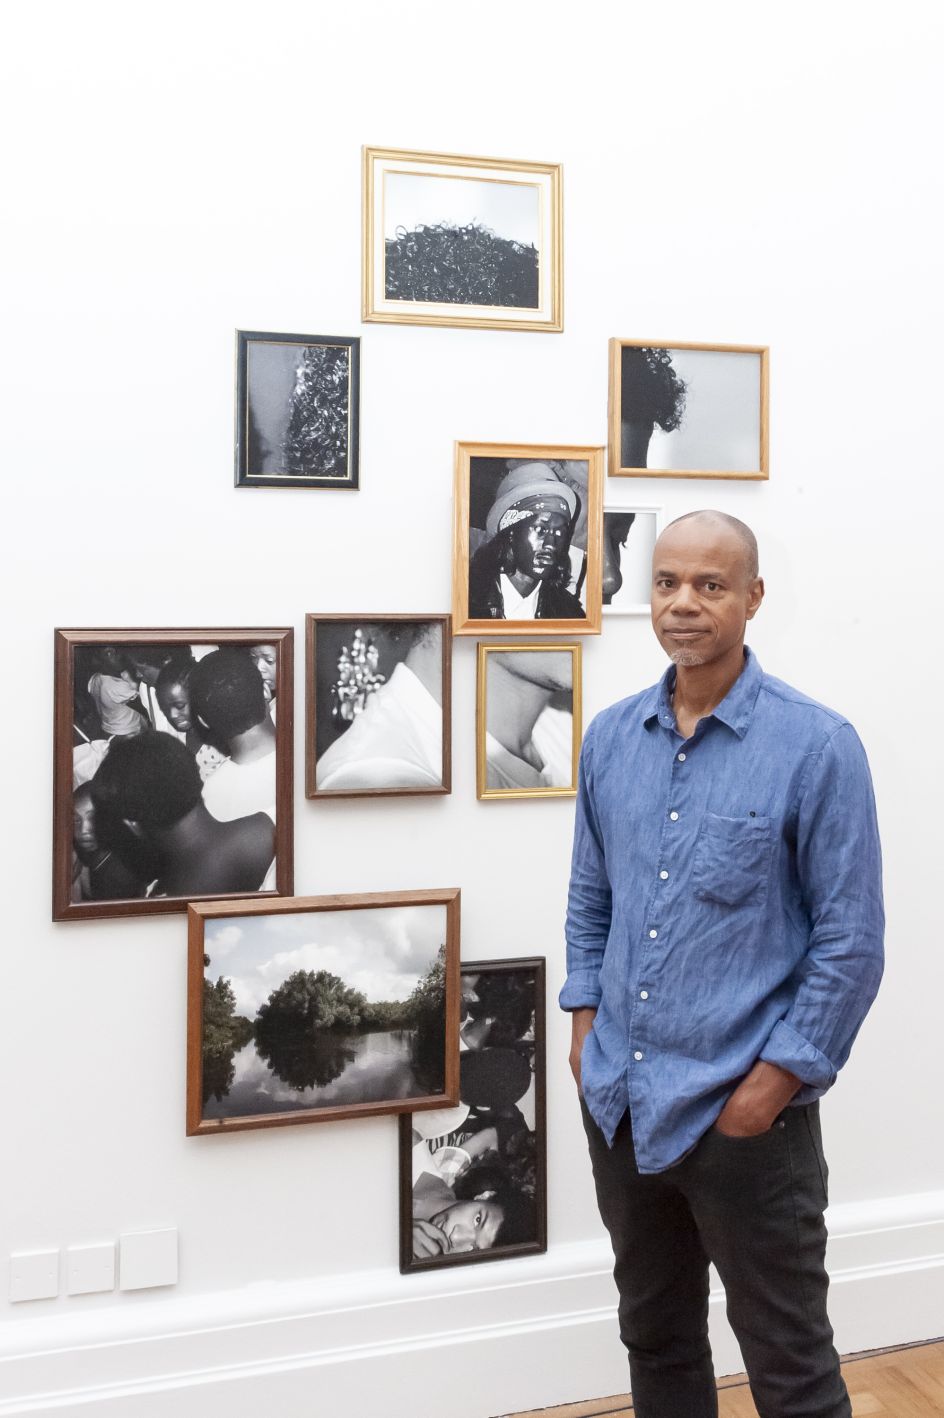 Todd Gray with his work, Exquisite Terribleness in the Mangroves 2014. Photograph by Jorge Herrera